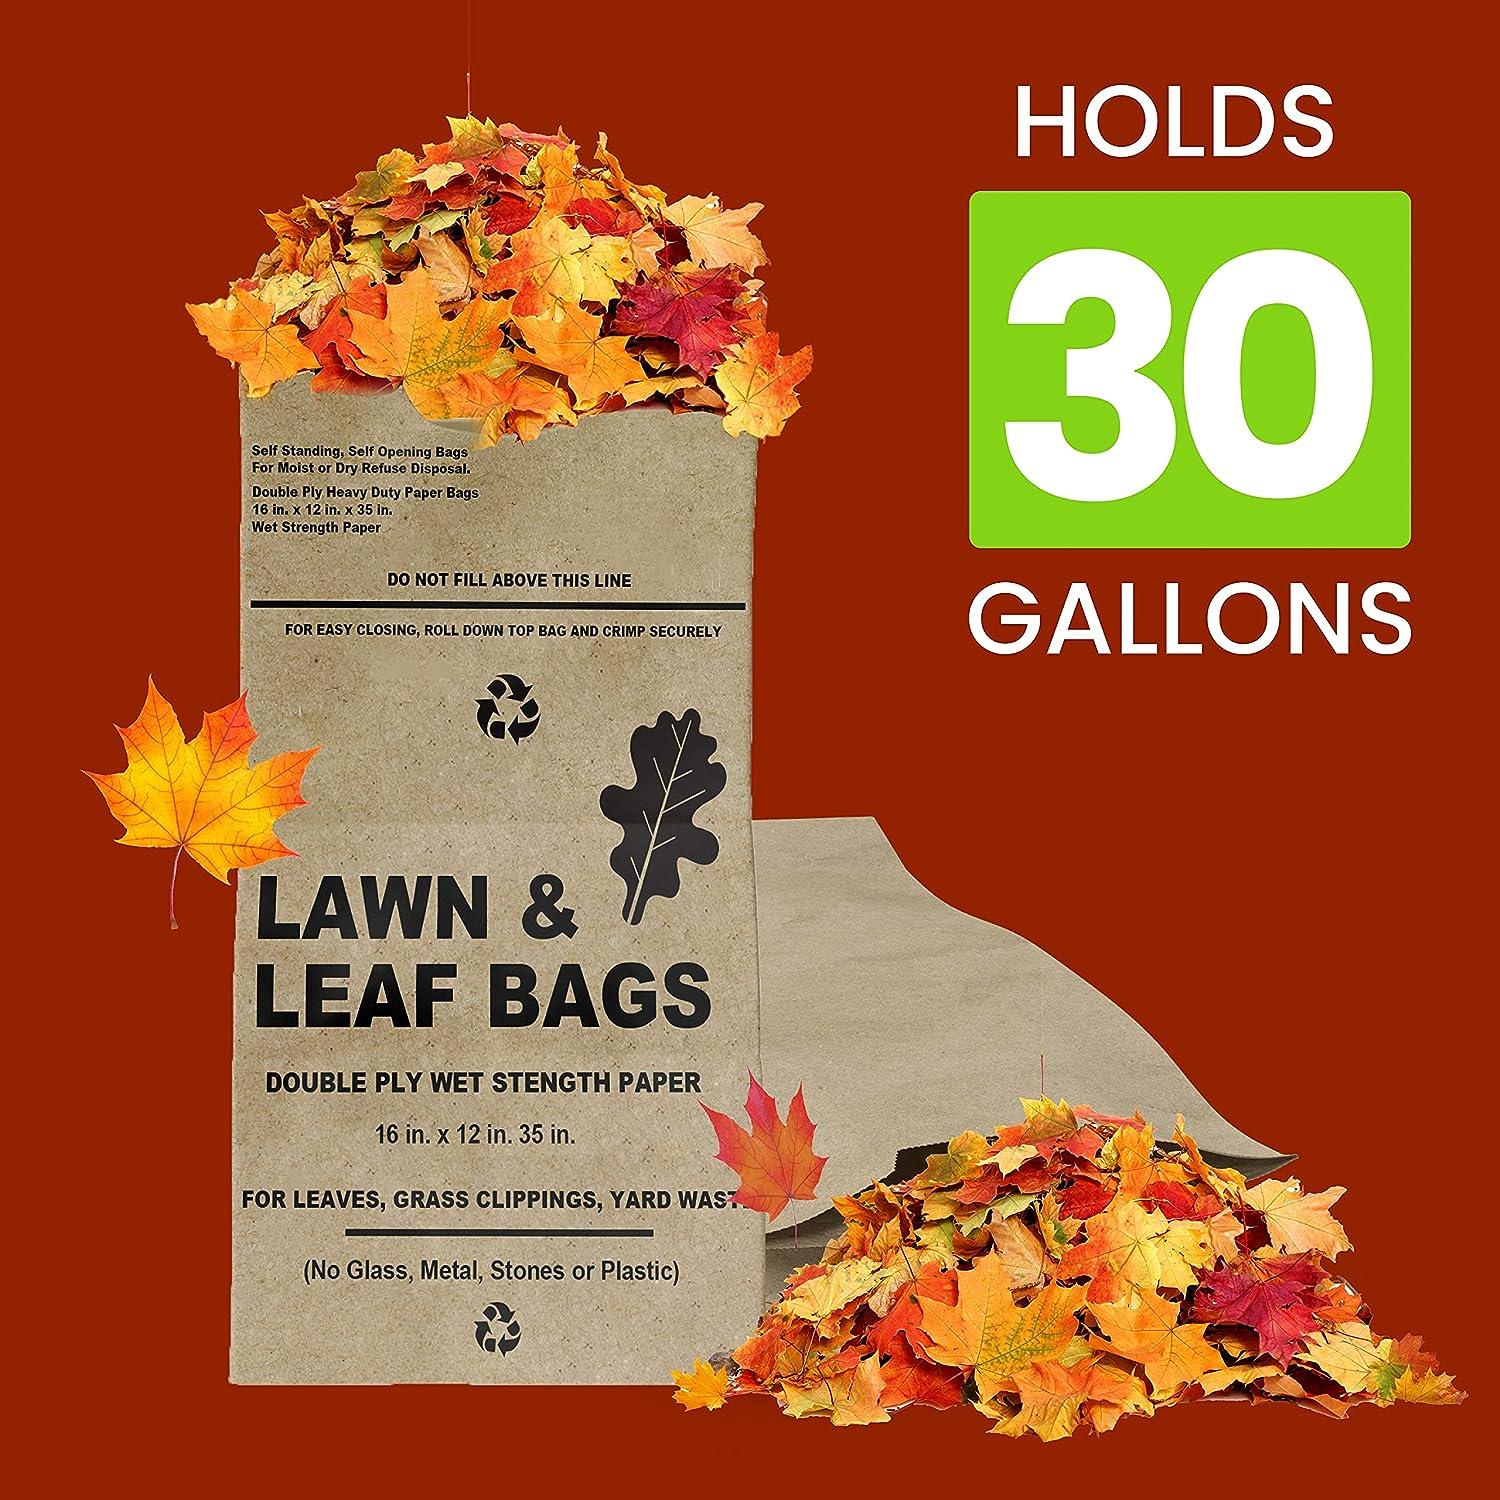 Paper Lawn & Leaf Bags 30 Gallon (10 Count) for Leaf and Yard